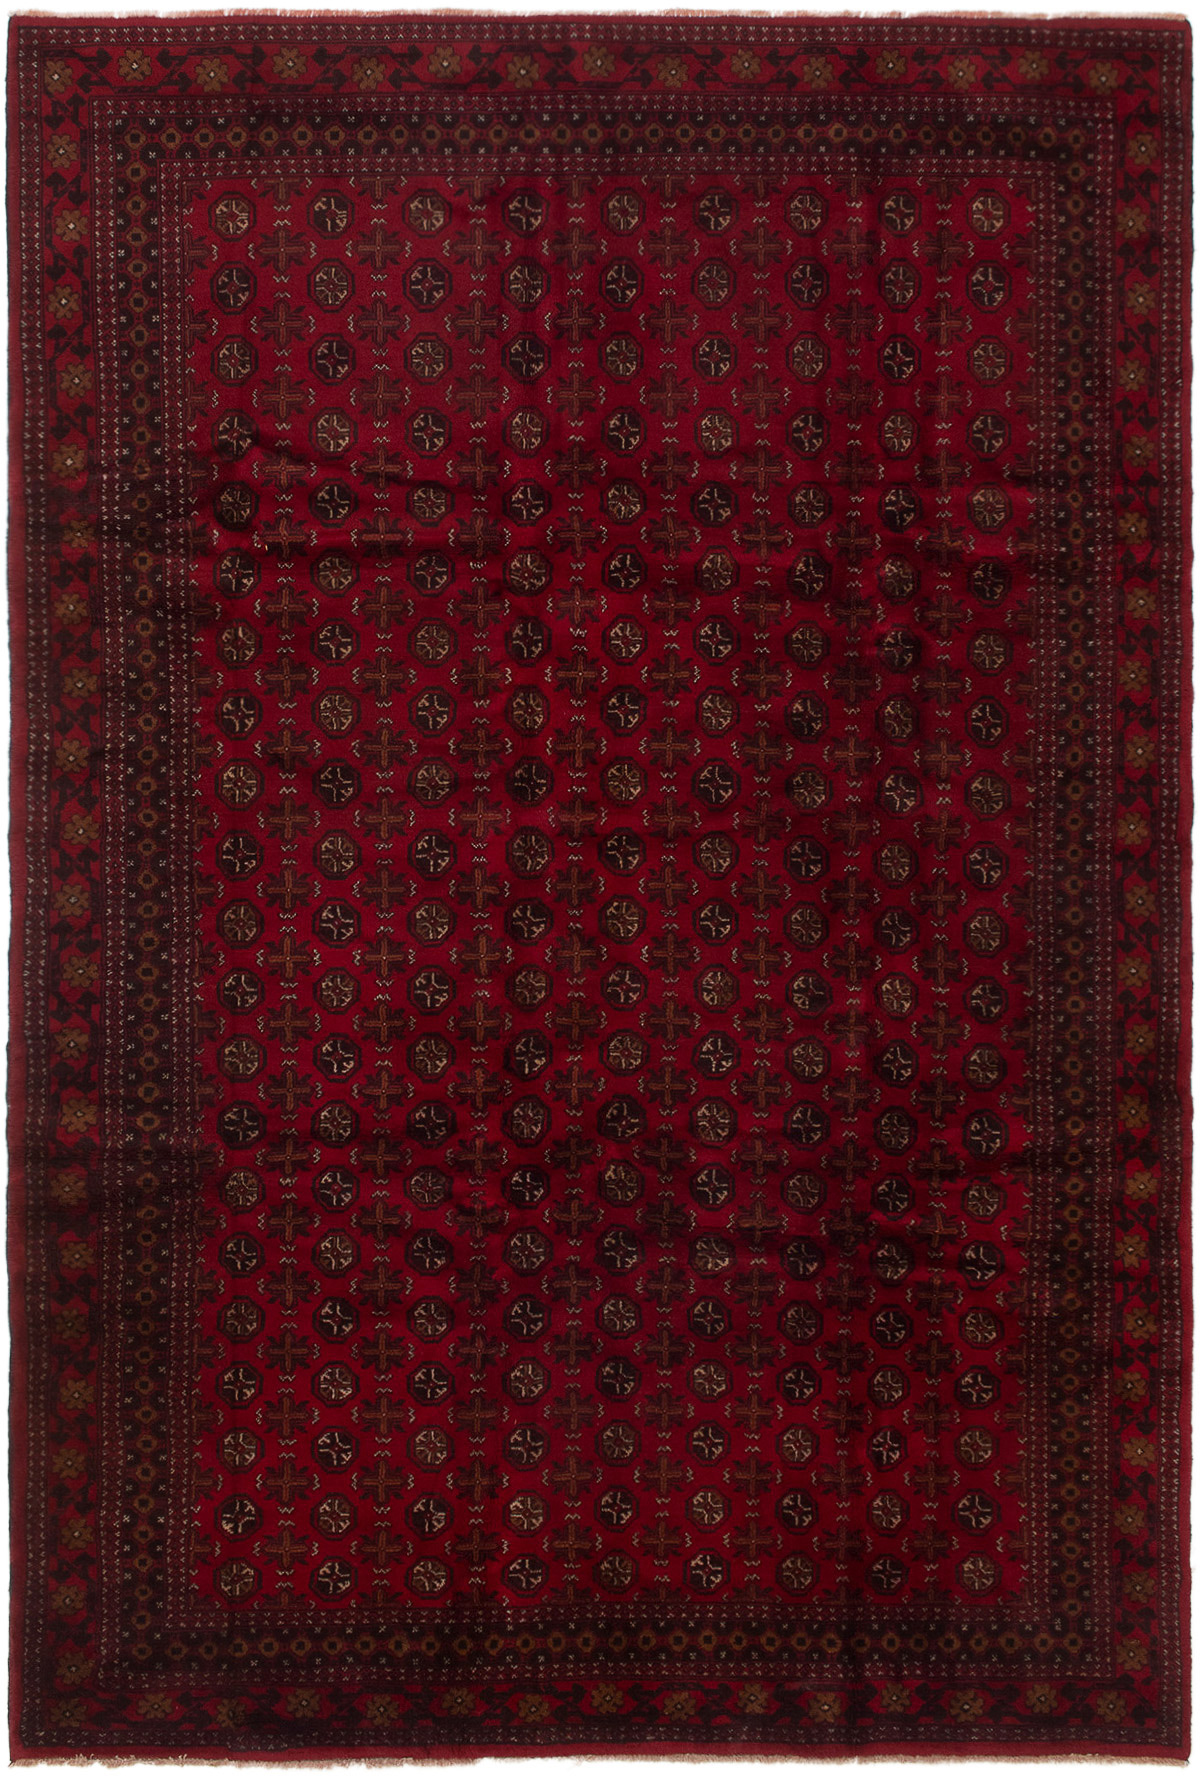 Hand-knotted Finest Rizbaft Red Wool Rug 6'9" x 10'1"  Size: 6'9" x 10'1"  